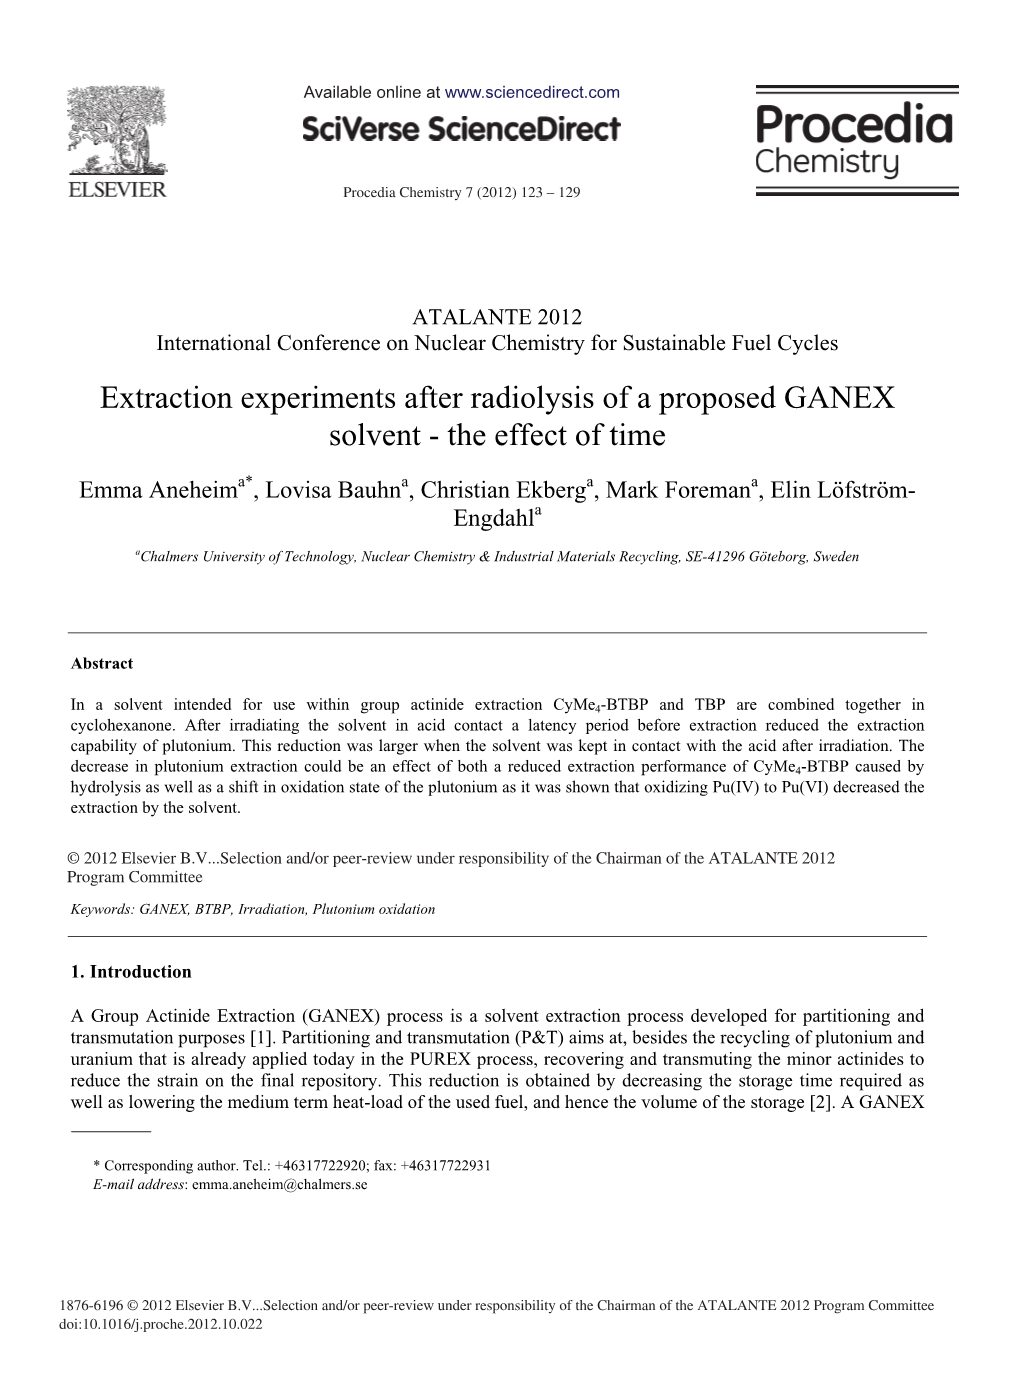 Extraction Experiments After Radiolysis of a Proposed GANEX Solvent - the Effect of Time